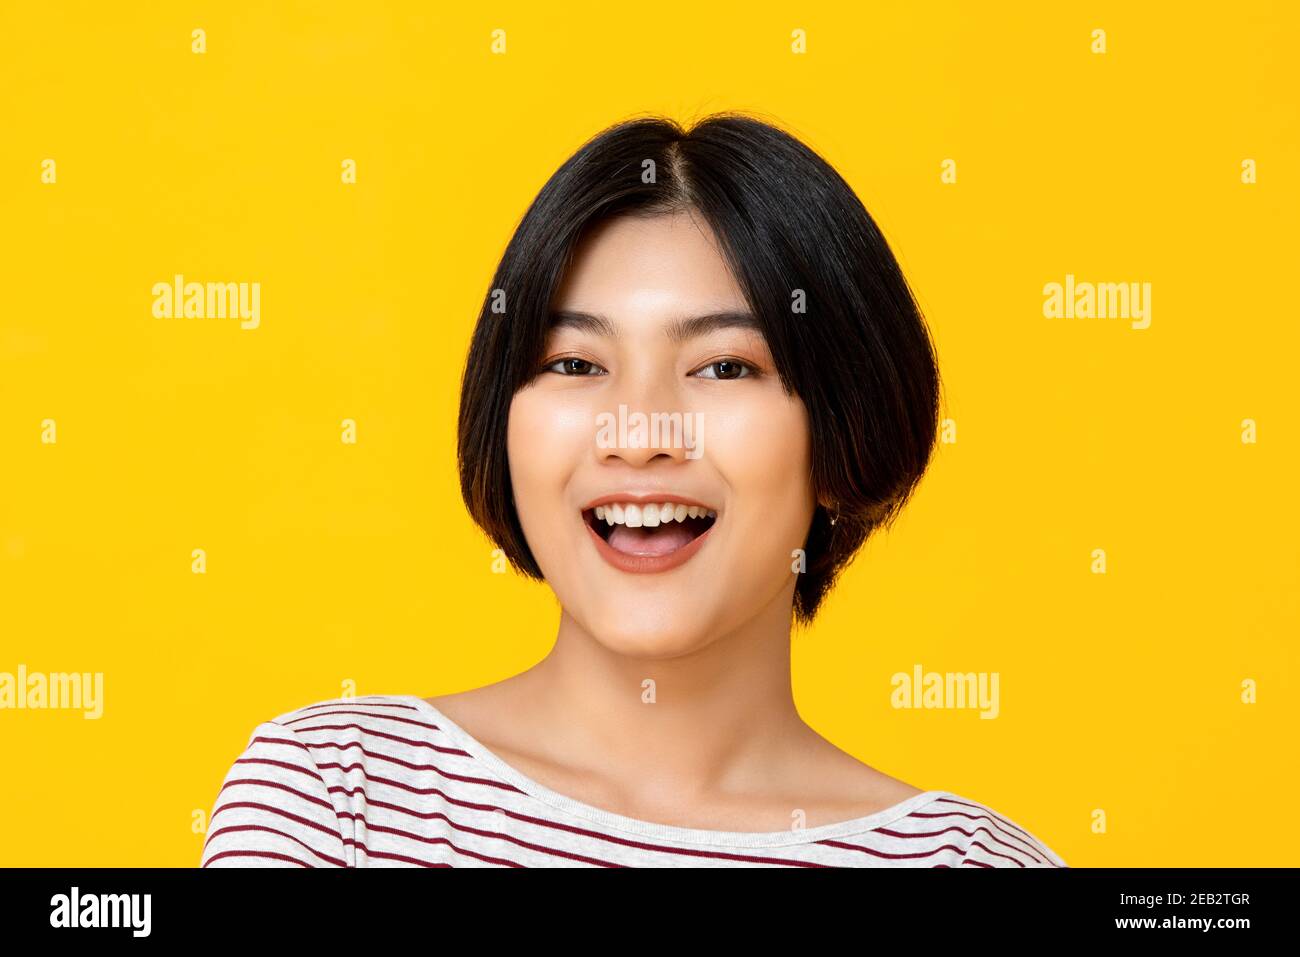 Young beautiful smiling Asian woman isolated in colorful yellow studio background Stock Photo